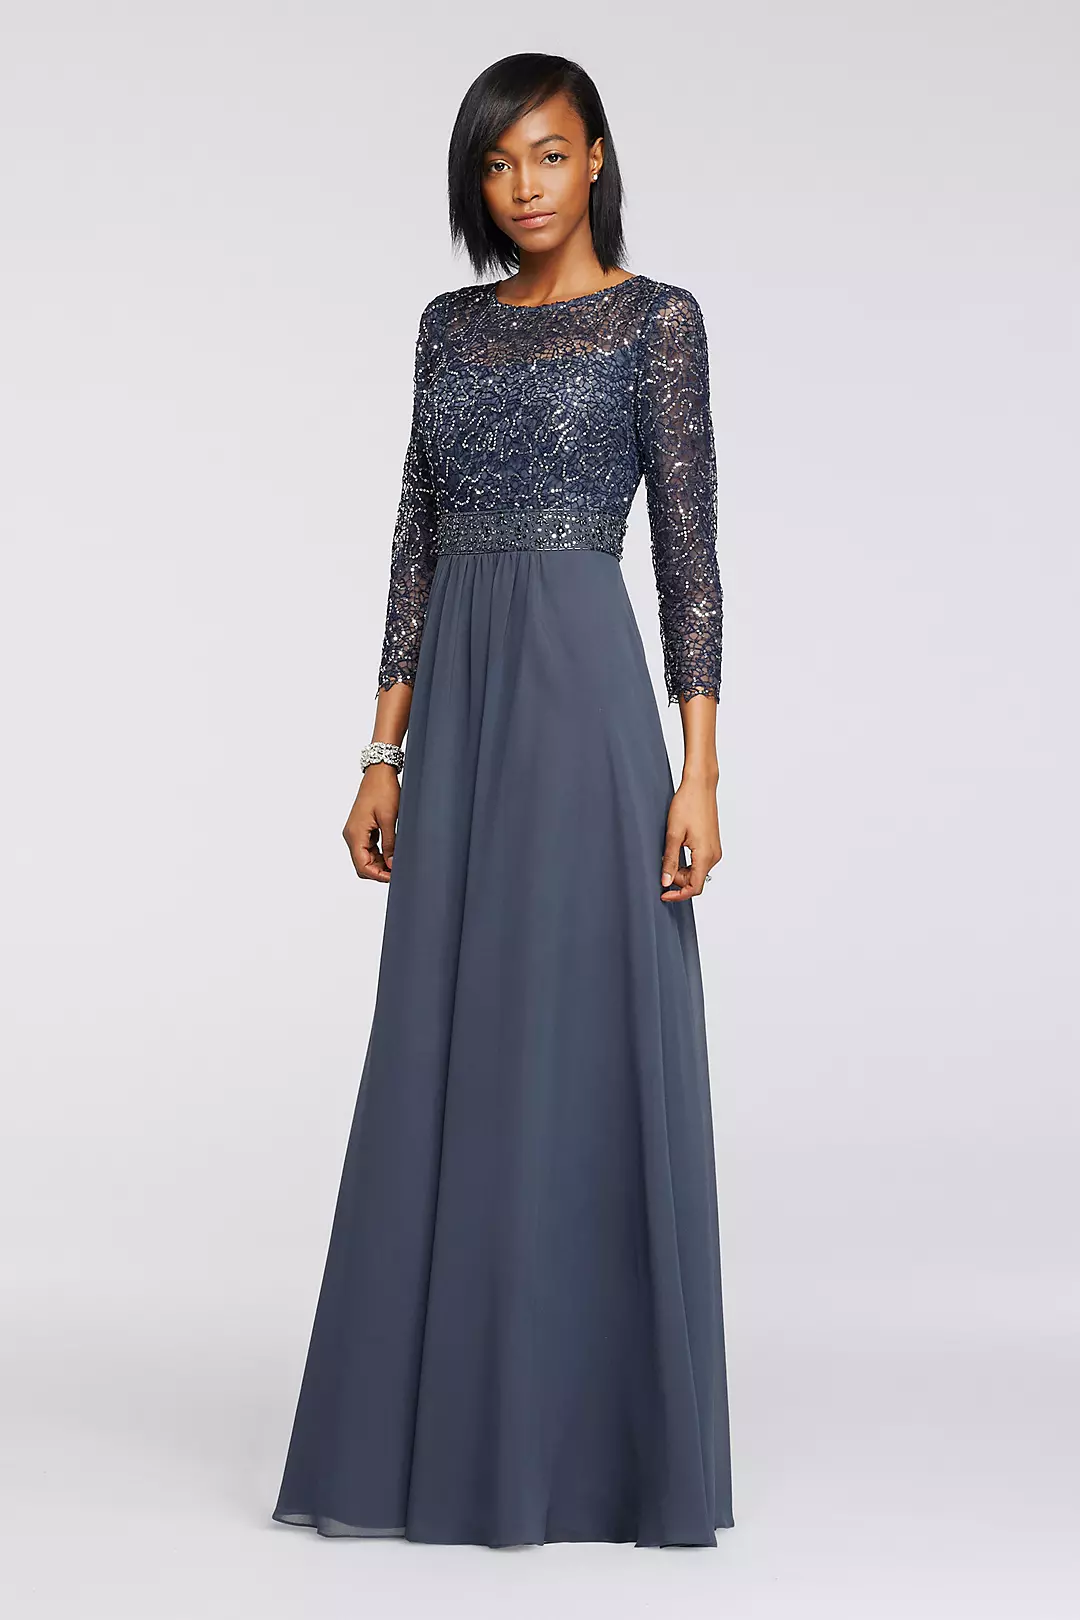 Sequin Lace Long Chiffon Dress with 3/4 Sleeves Image